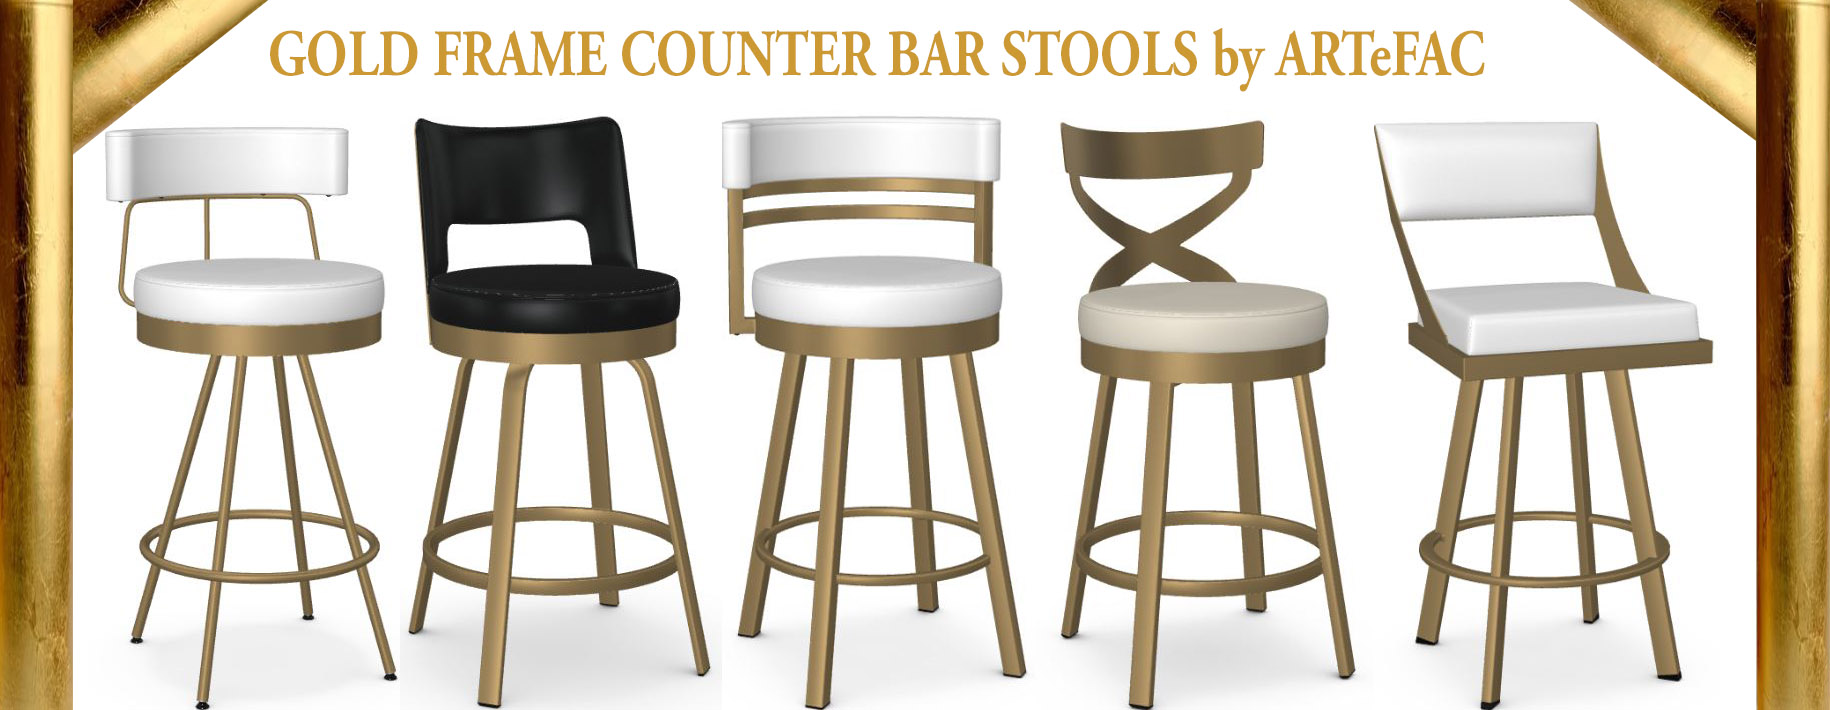 Set of 2 Counter Height Bar Stools Adjustable Swivel Pub Dining Chairs Cream USA 